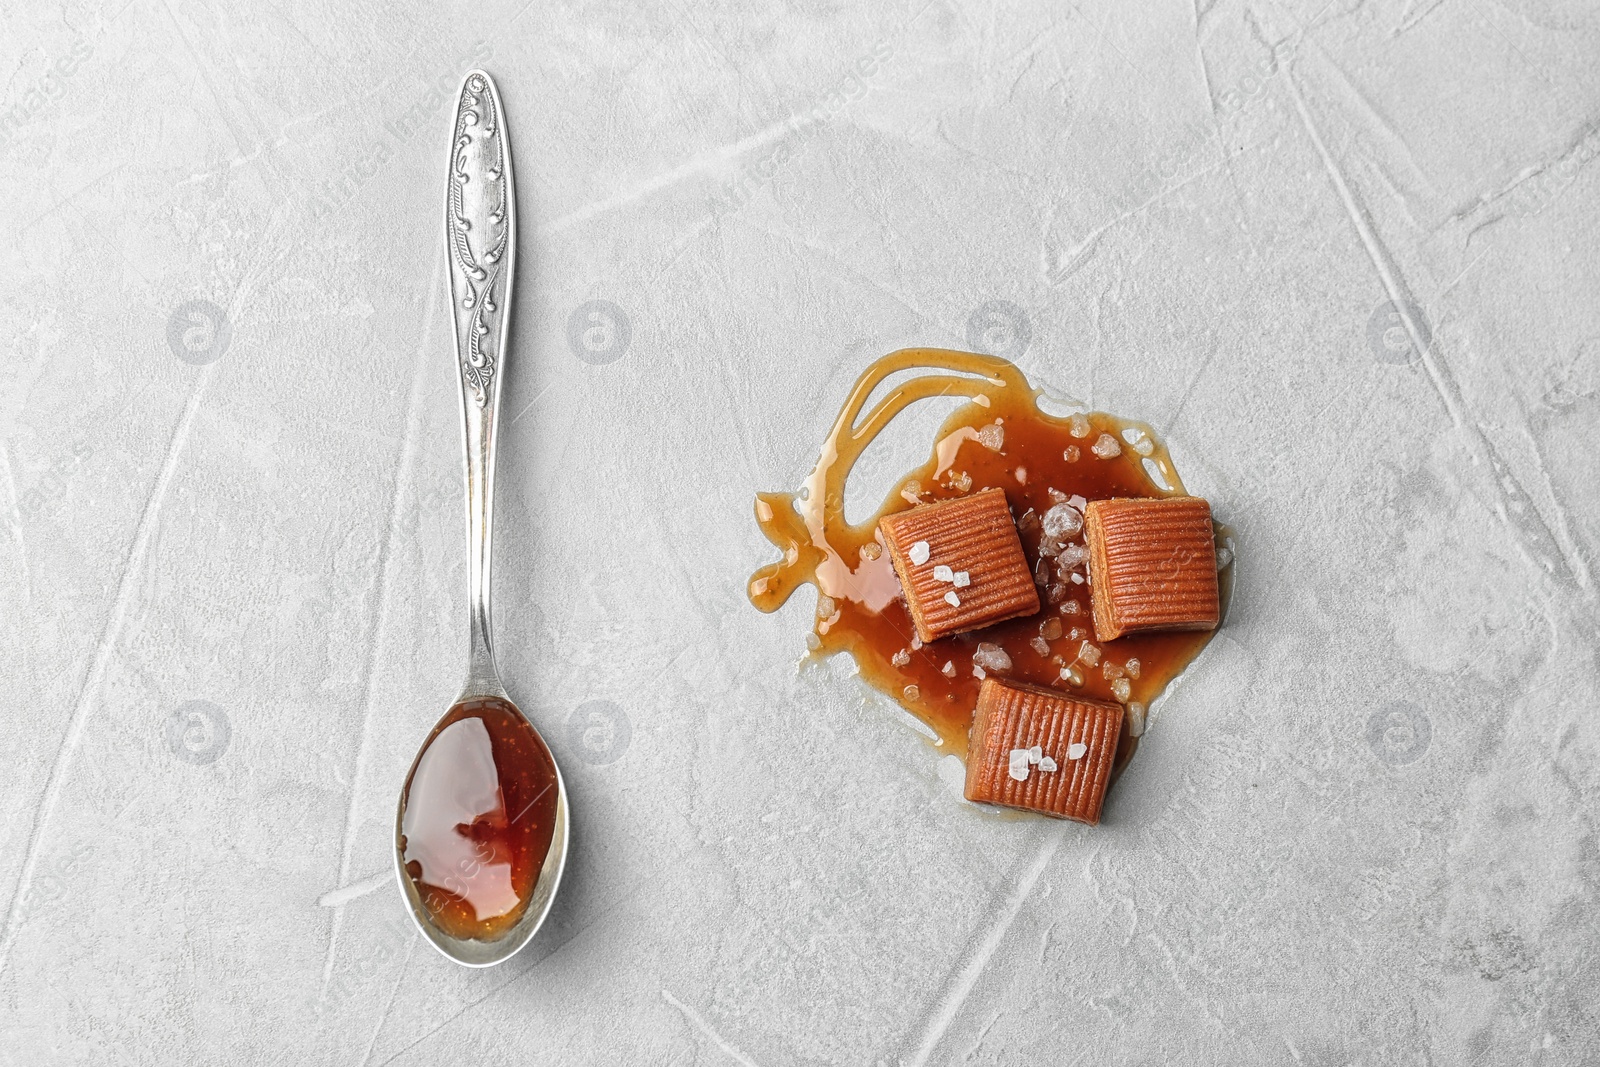 Photo of Spoon and candies with salted caramel sauce on light background, top view